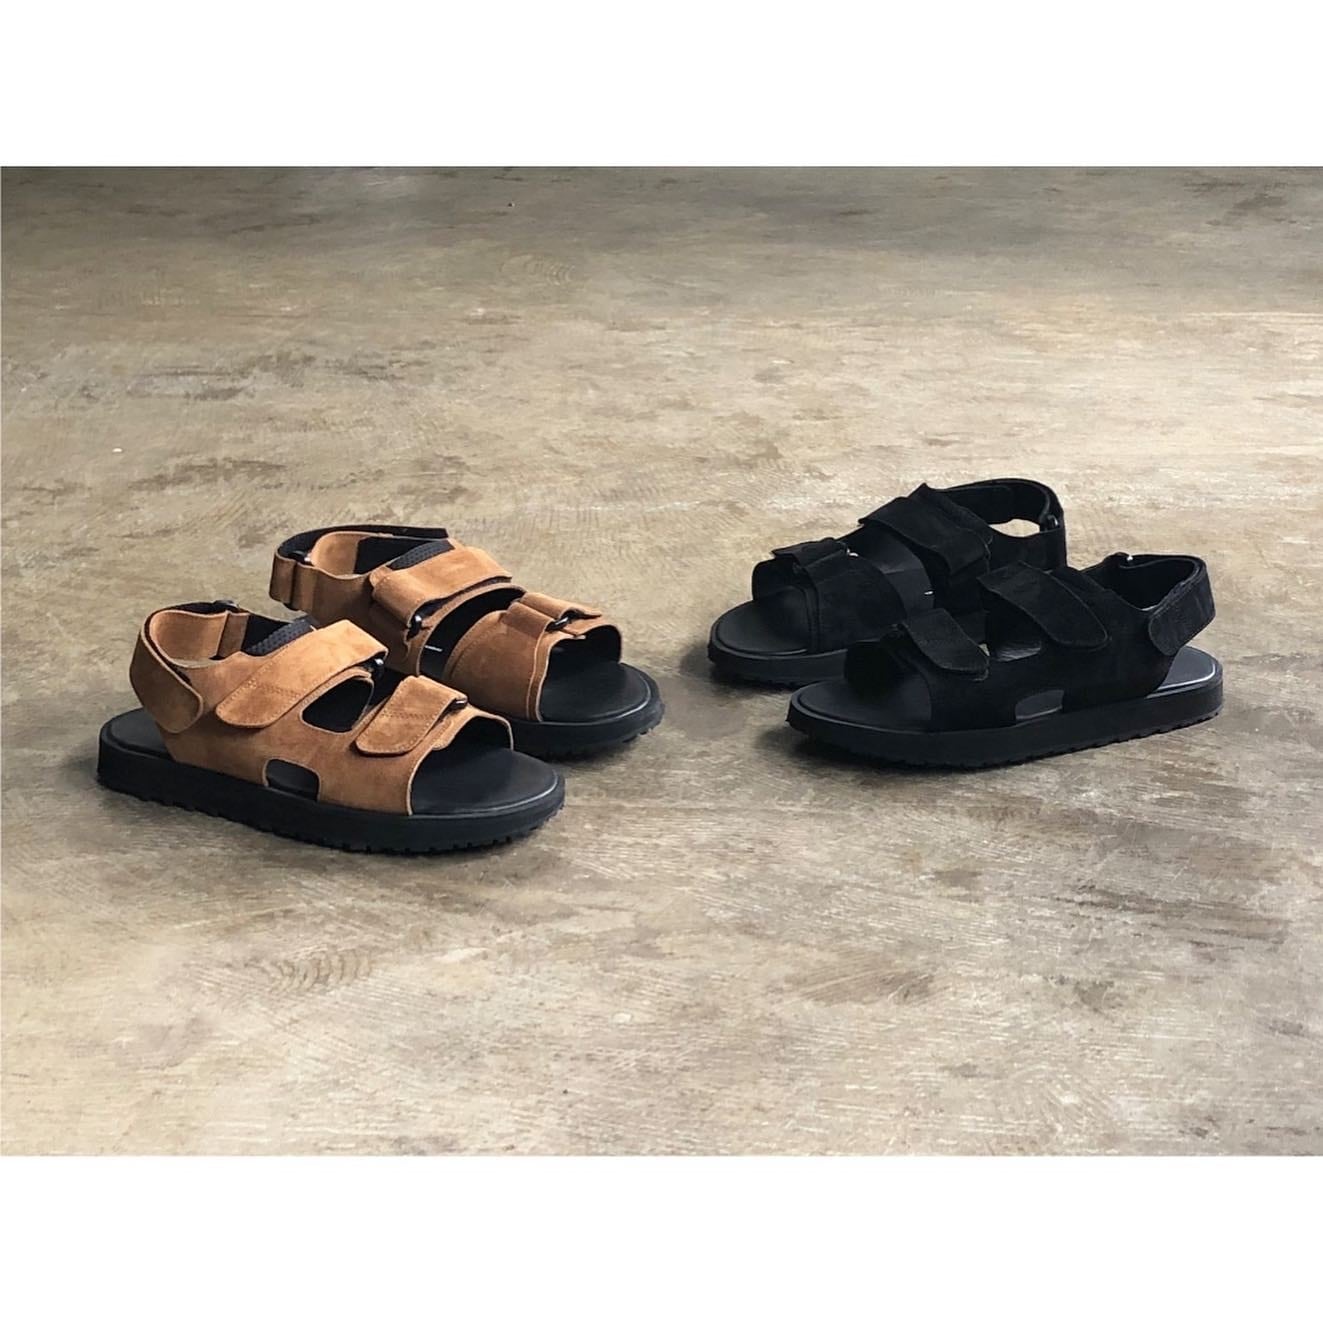 REPRODUCTION OF FOUND (リプロダクションオブファウンド) BRITISH MILITARY SANDAL | AUTHENTIC  Life Store powered by BASE